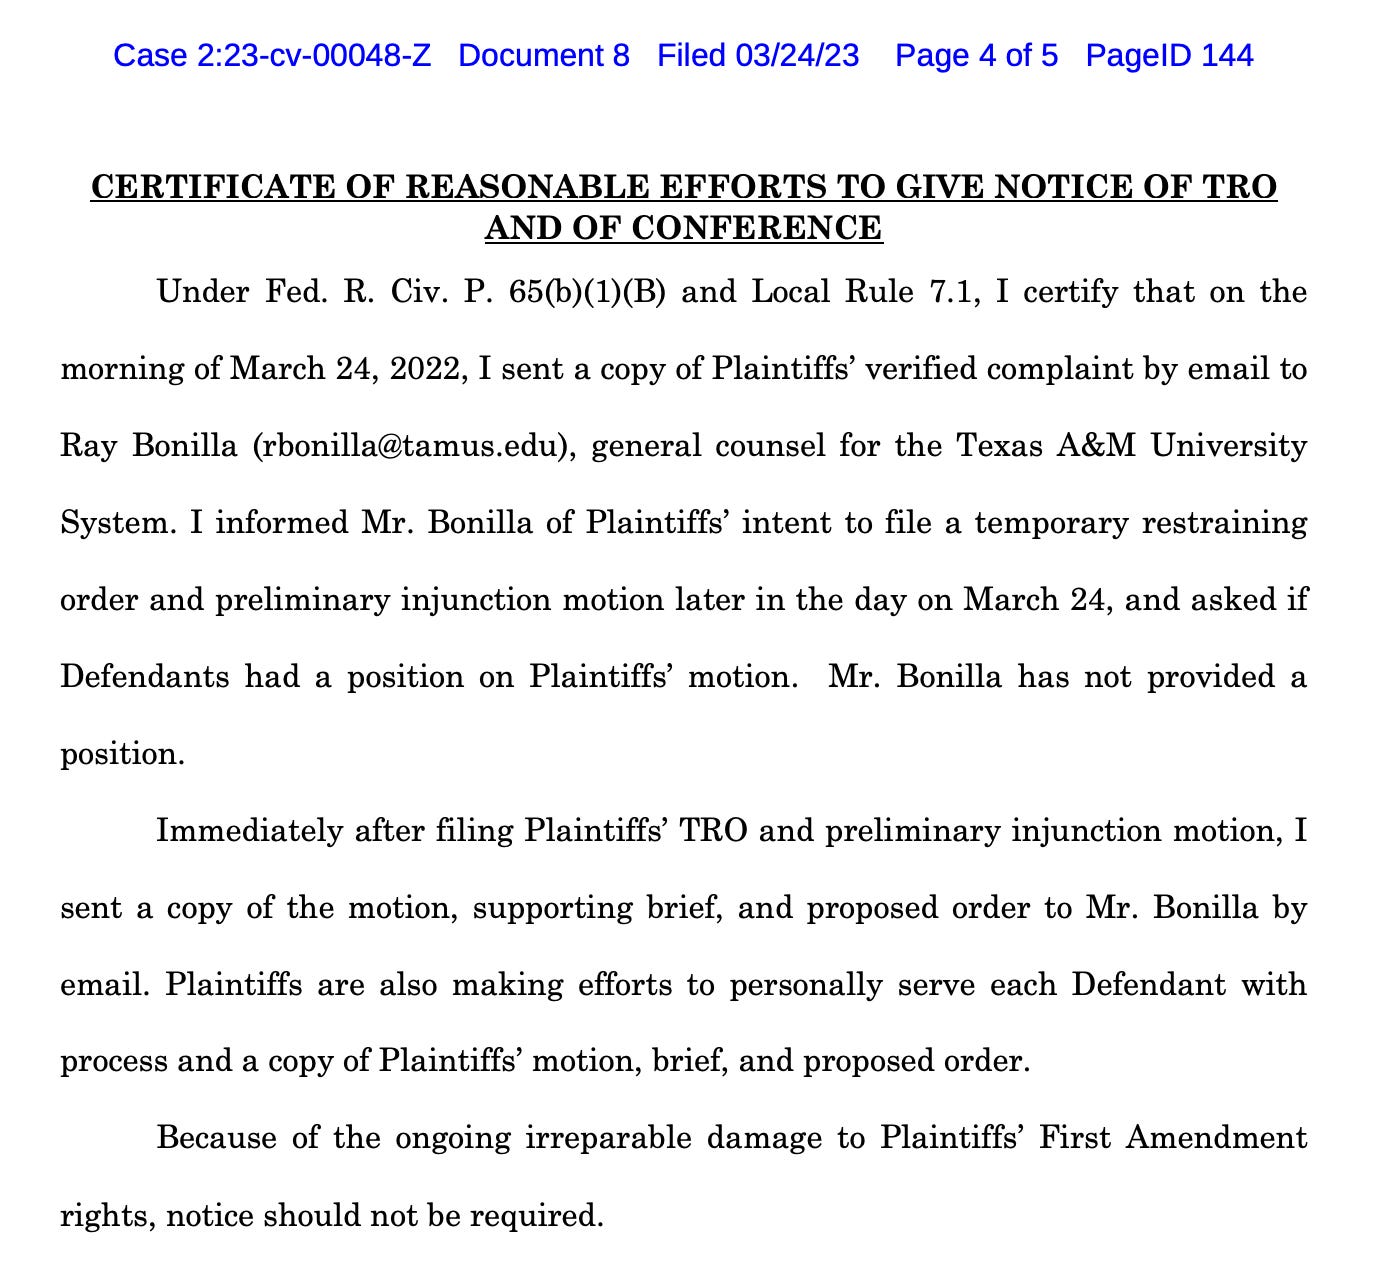 Under Fed. R. Civ. P. 65(b)(1)(B) and Local Rule 7.1, I certify that on the morning of March 24, 2022, I sent a copy of Plaintiffs’ verified complaint by email to Ray Bonilla (rbonilla@tamus.edu), general counsel for the Texas A&M University System. I informed Mr. Bonilla of Plaintiffs’ intent to file a temporary restraining order and preliminary injunction motion later in the day on March 24, and asked if Defendants had a position on Plaintiffs’ motion. Mr. Bonilla has not provided a position. Immediately after filing Plaintiffs’ TRO and preliminary injunction motion, I sent a copy of the motion, supporting brief, and proposed order to Mr. Bonilla by email. Plaintiffs are also making efforts to personally serve each Defendant with process and a copy of Plaintiffs’ motion, brief, and proposed order. Because of the ongoing irreparable damage to Plaintiffs’ First Amendment rights, notice should not be required. 